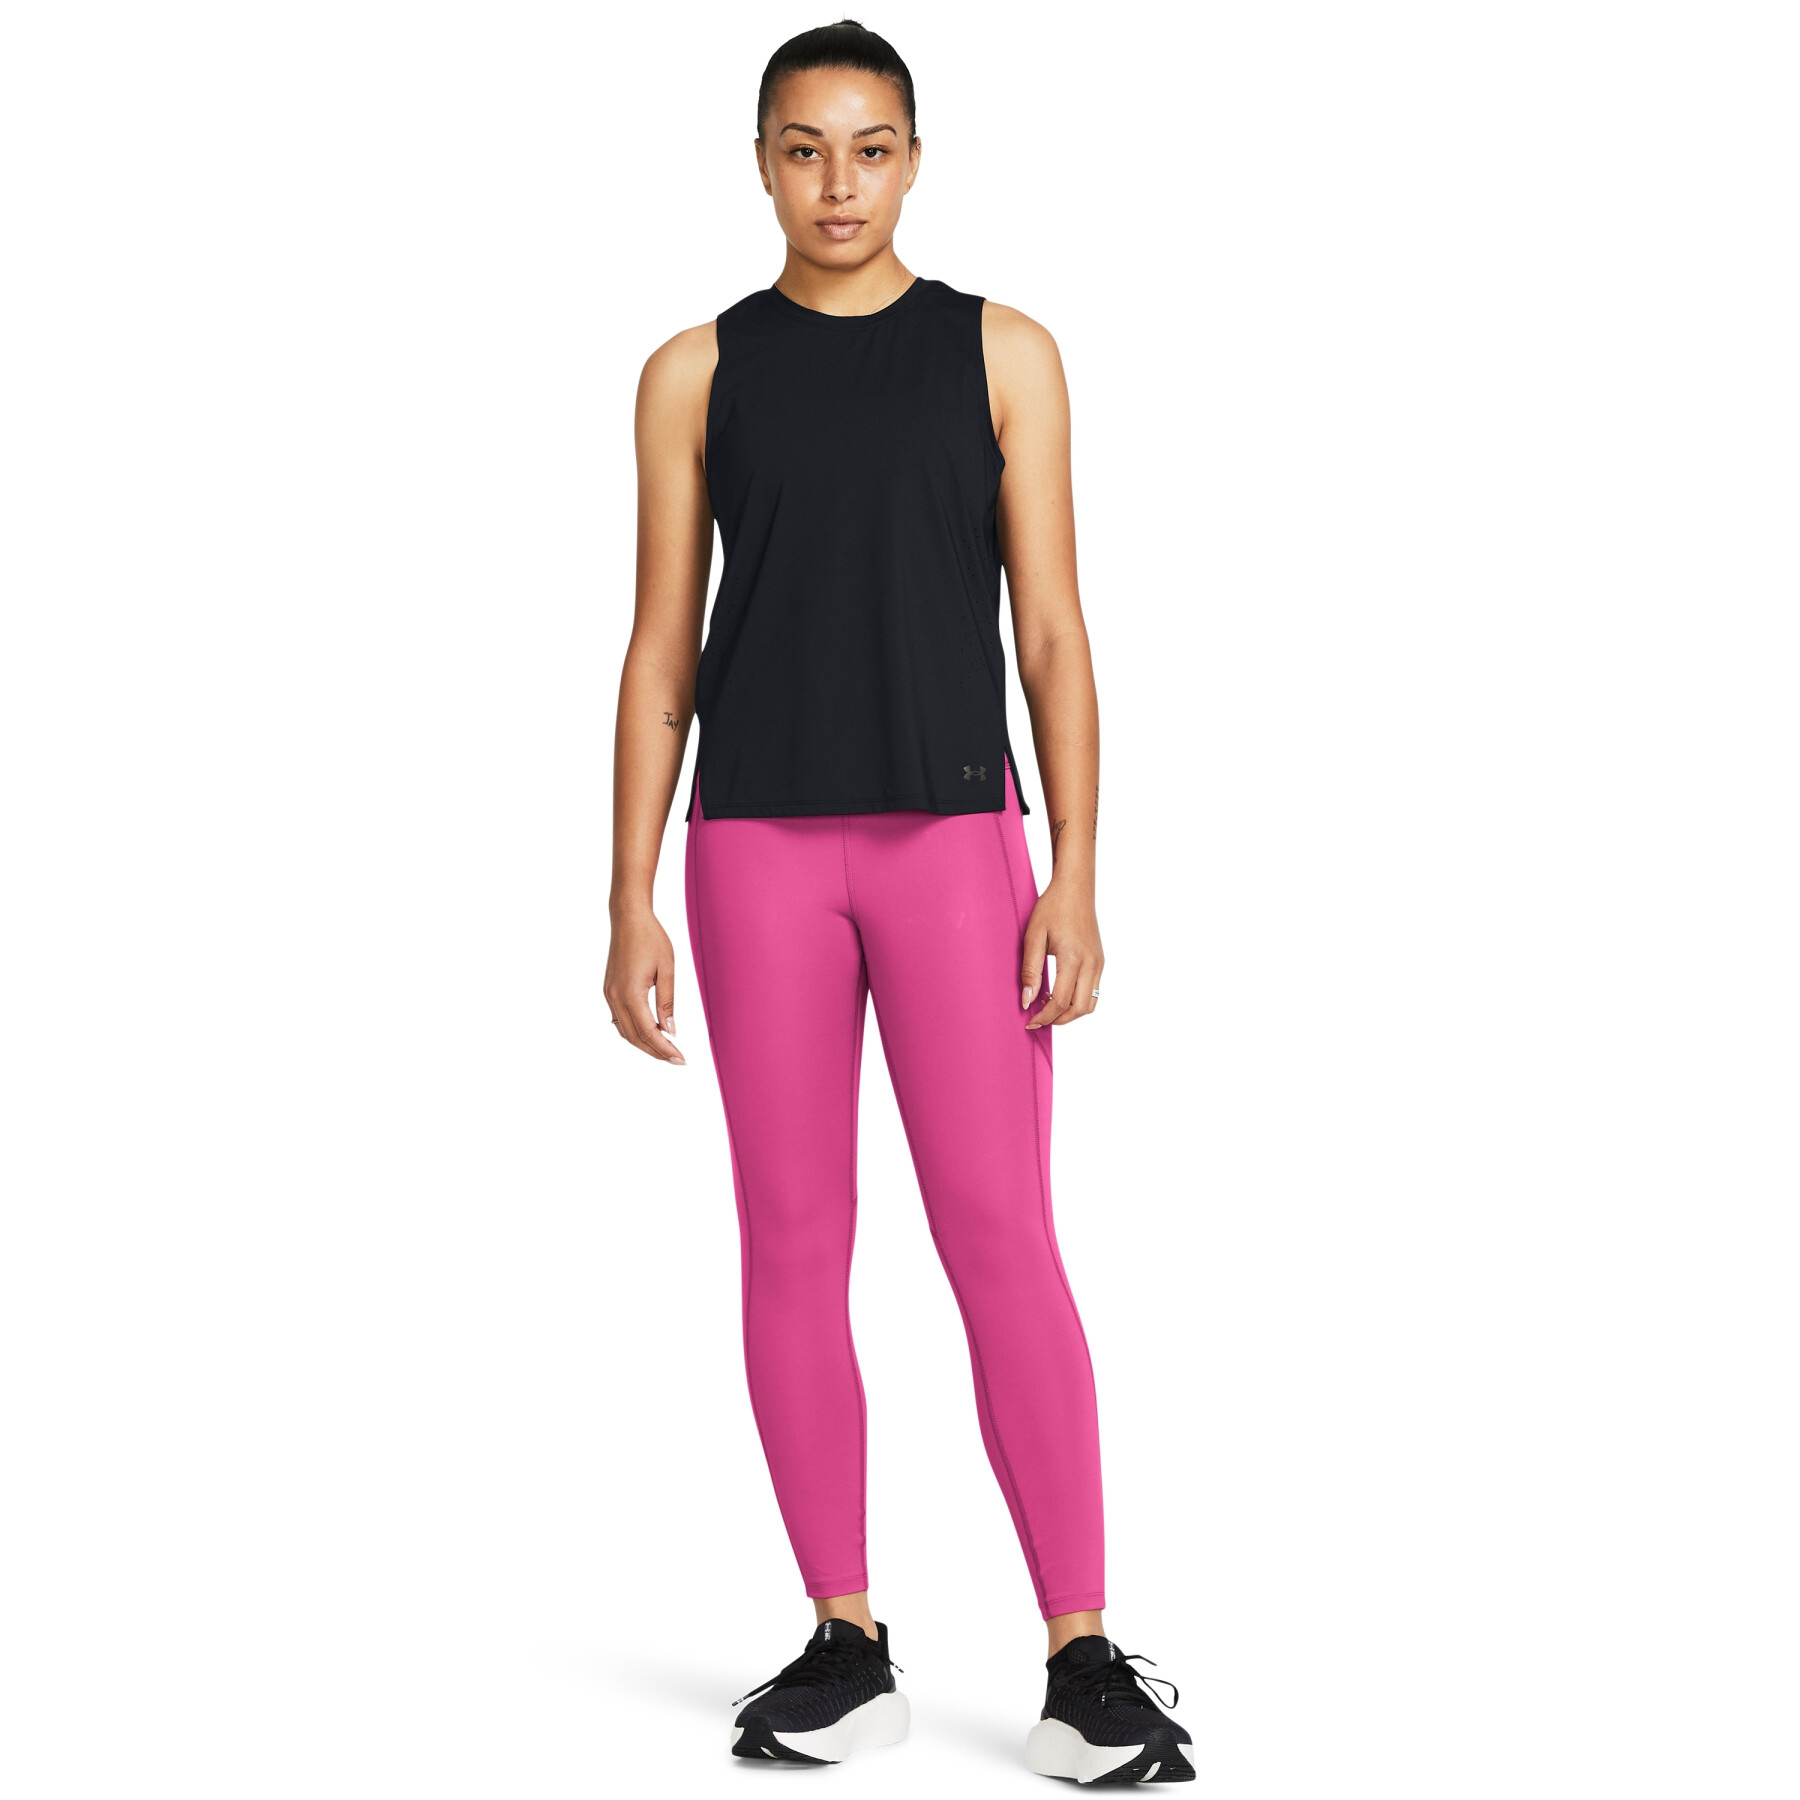 Leggings para mulher Under Armour Fly Fast 3.0